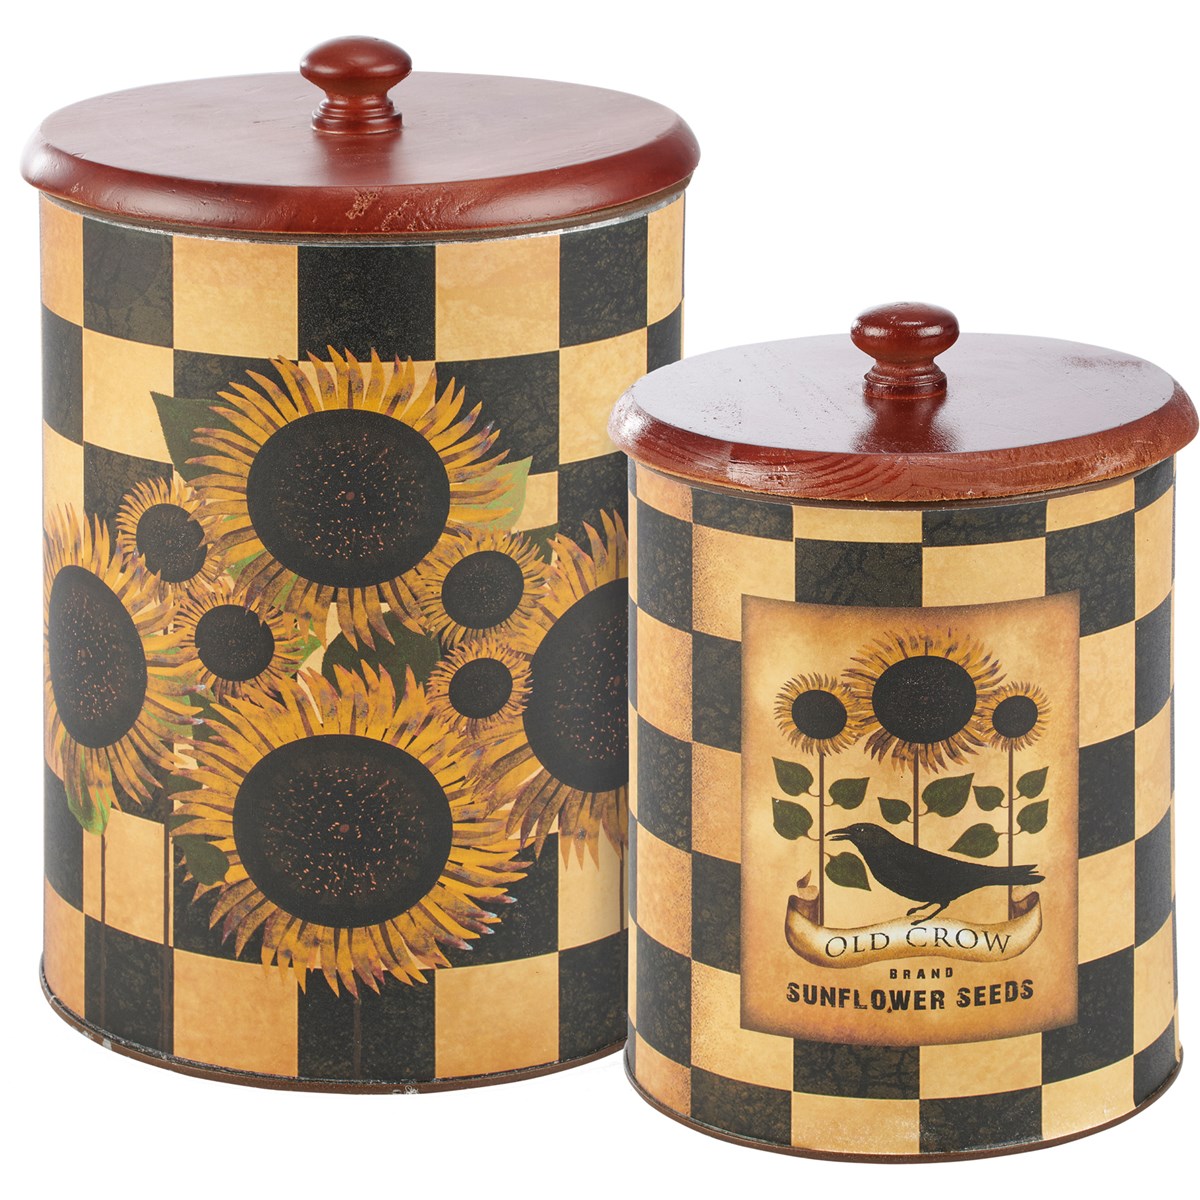 Sunflower Seeds Canister Set - Metal, Paper, Wood